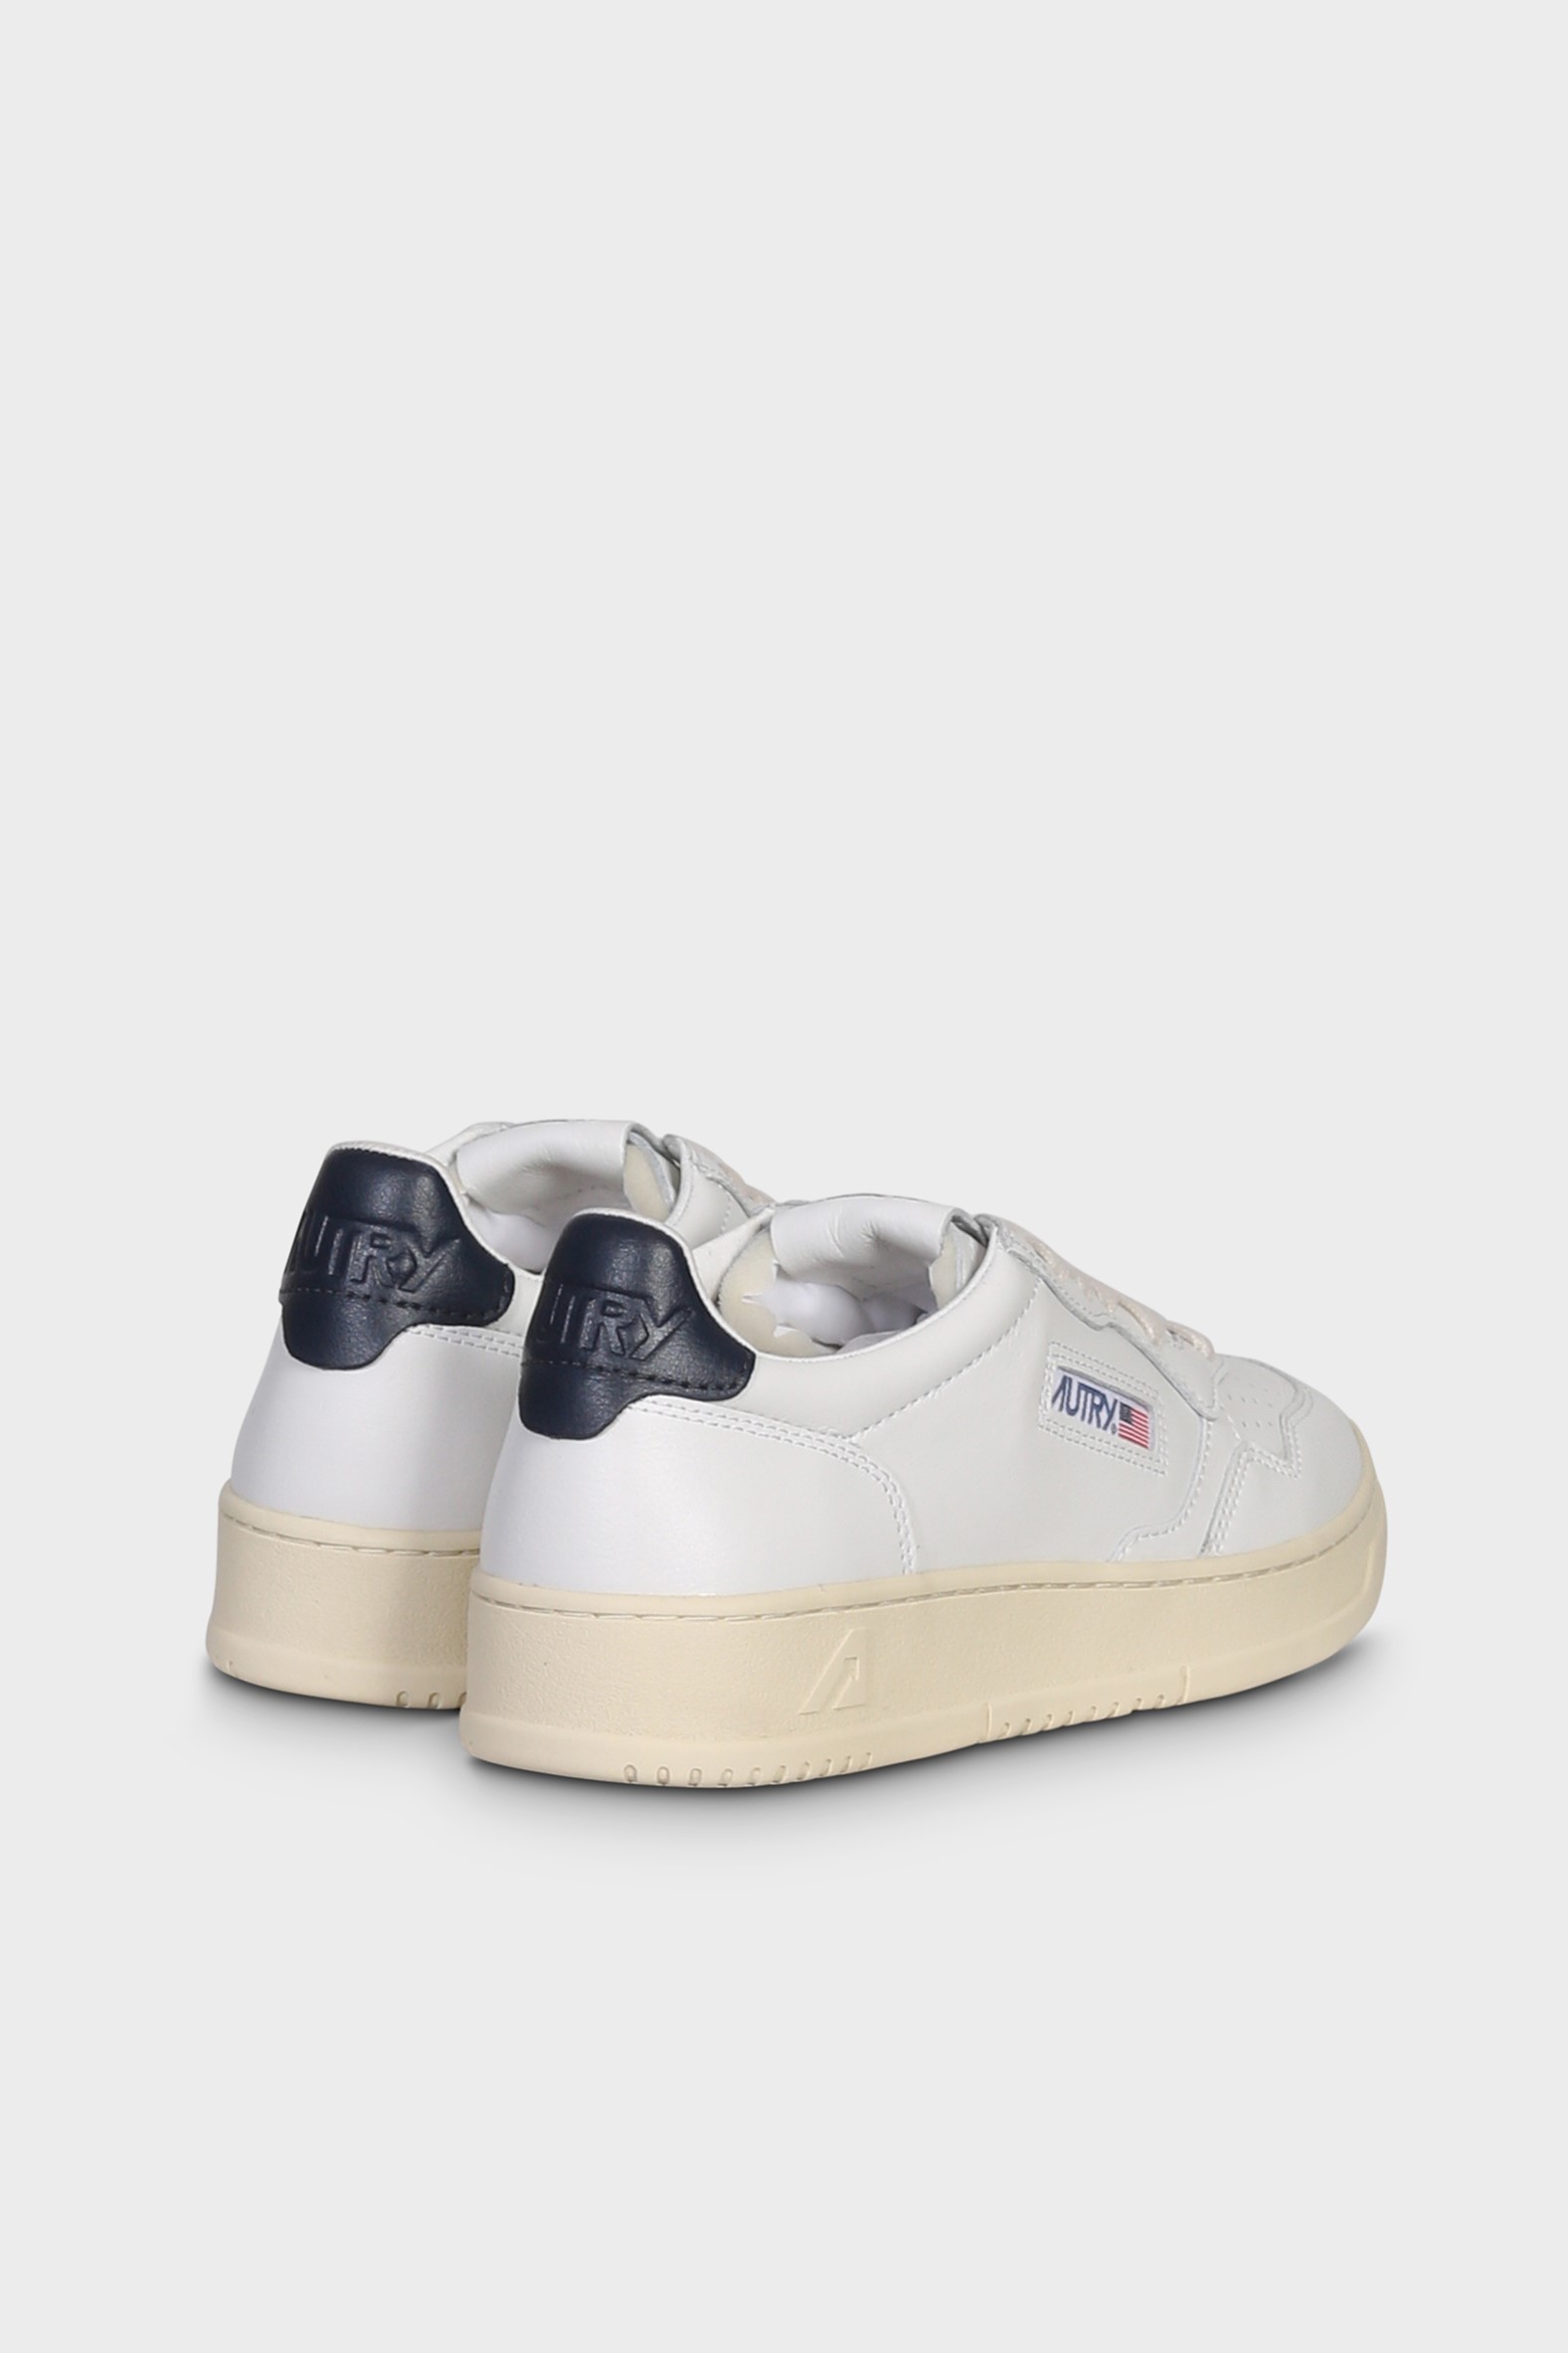 AUTRY ACTION SHOES Medalist Low Sneaker White/Space 42